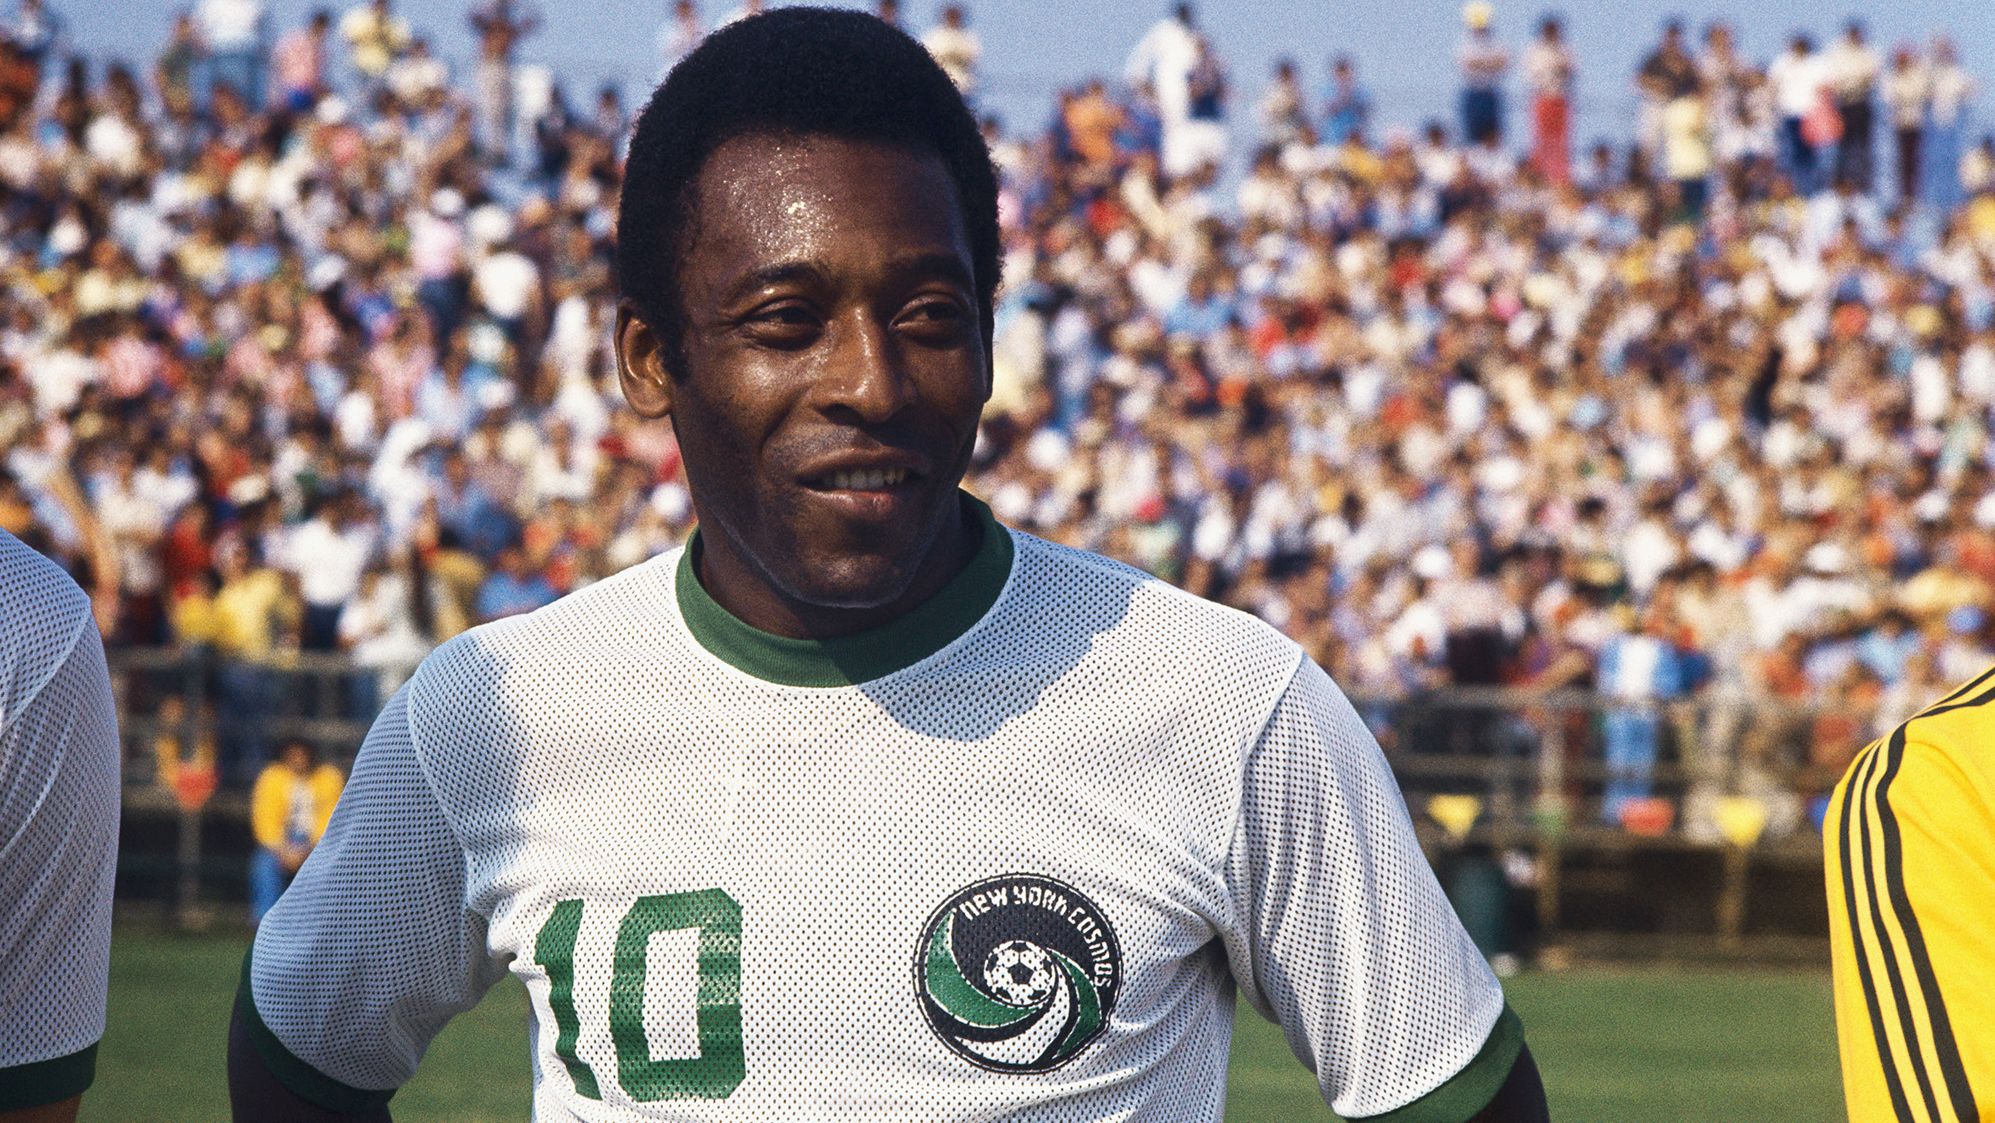 Pelé joined the New York Cosmos in 1975 and played his last official game in 1977. 